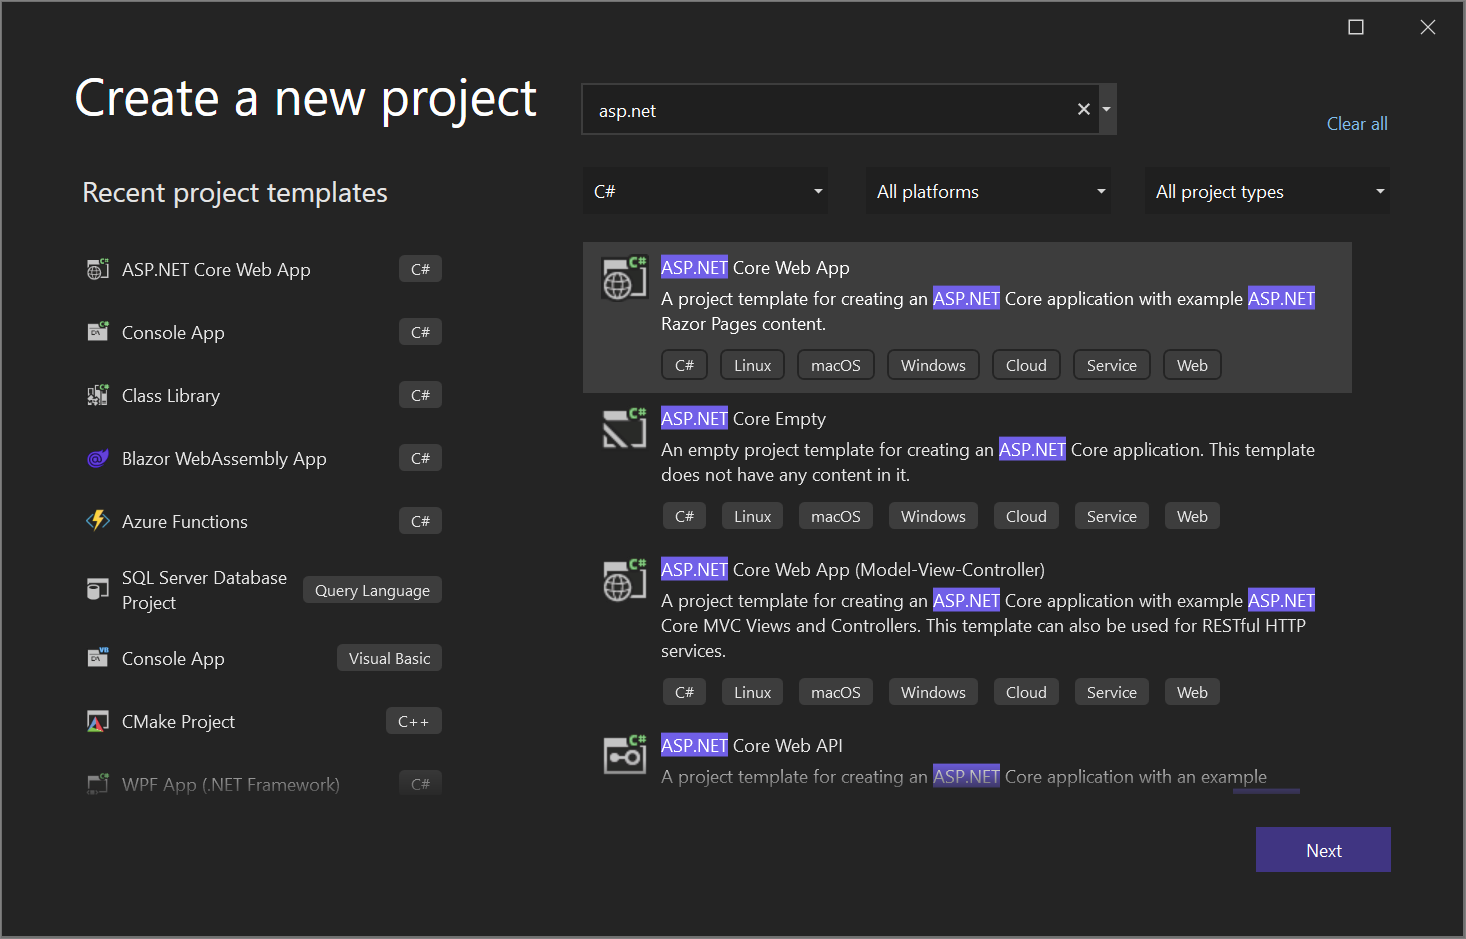 Screenshot of the project template filters in Visual Studio 2022.